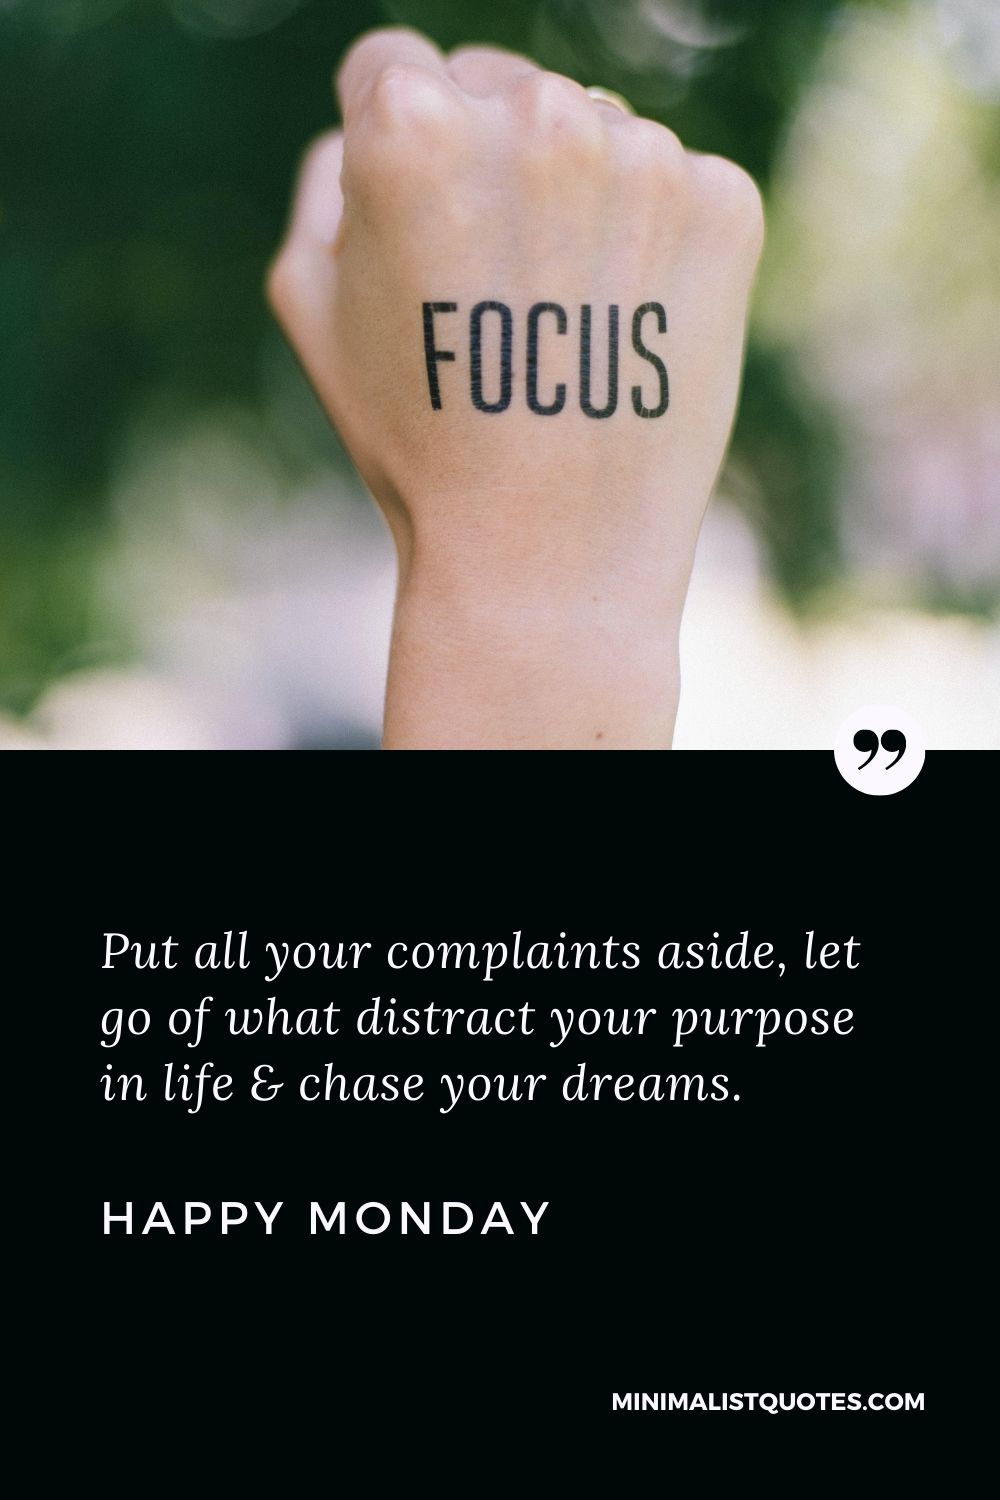 Monday Motivation Wish, Quote & Message With HD Image: Put all your complaints aside, let go of what distract your purpose in life & chase your dreams. Happy Monday!